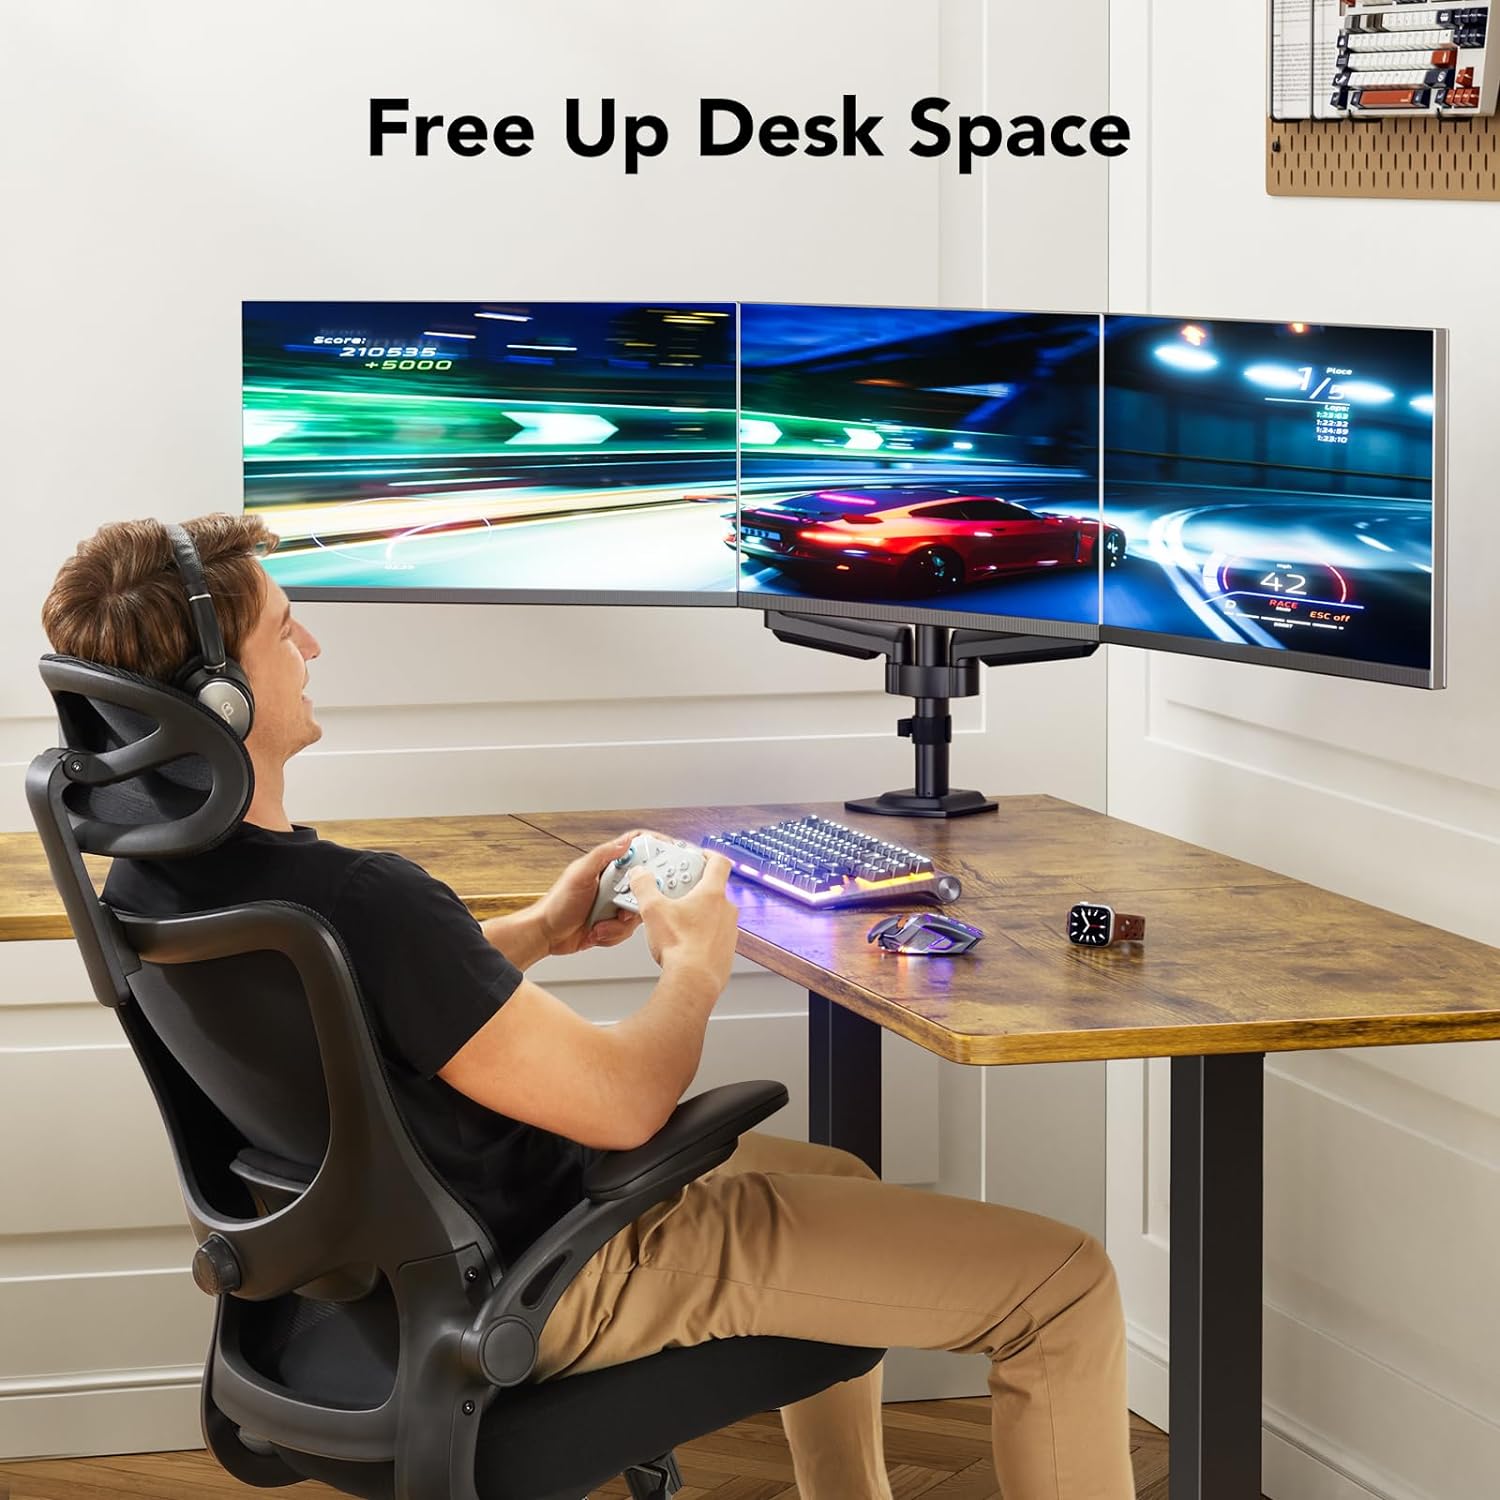 HUANUO Triple Monitor Mount for 13-27 inch Computer Screens, Triple Monitor Stand - $70